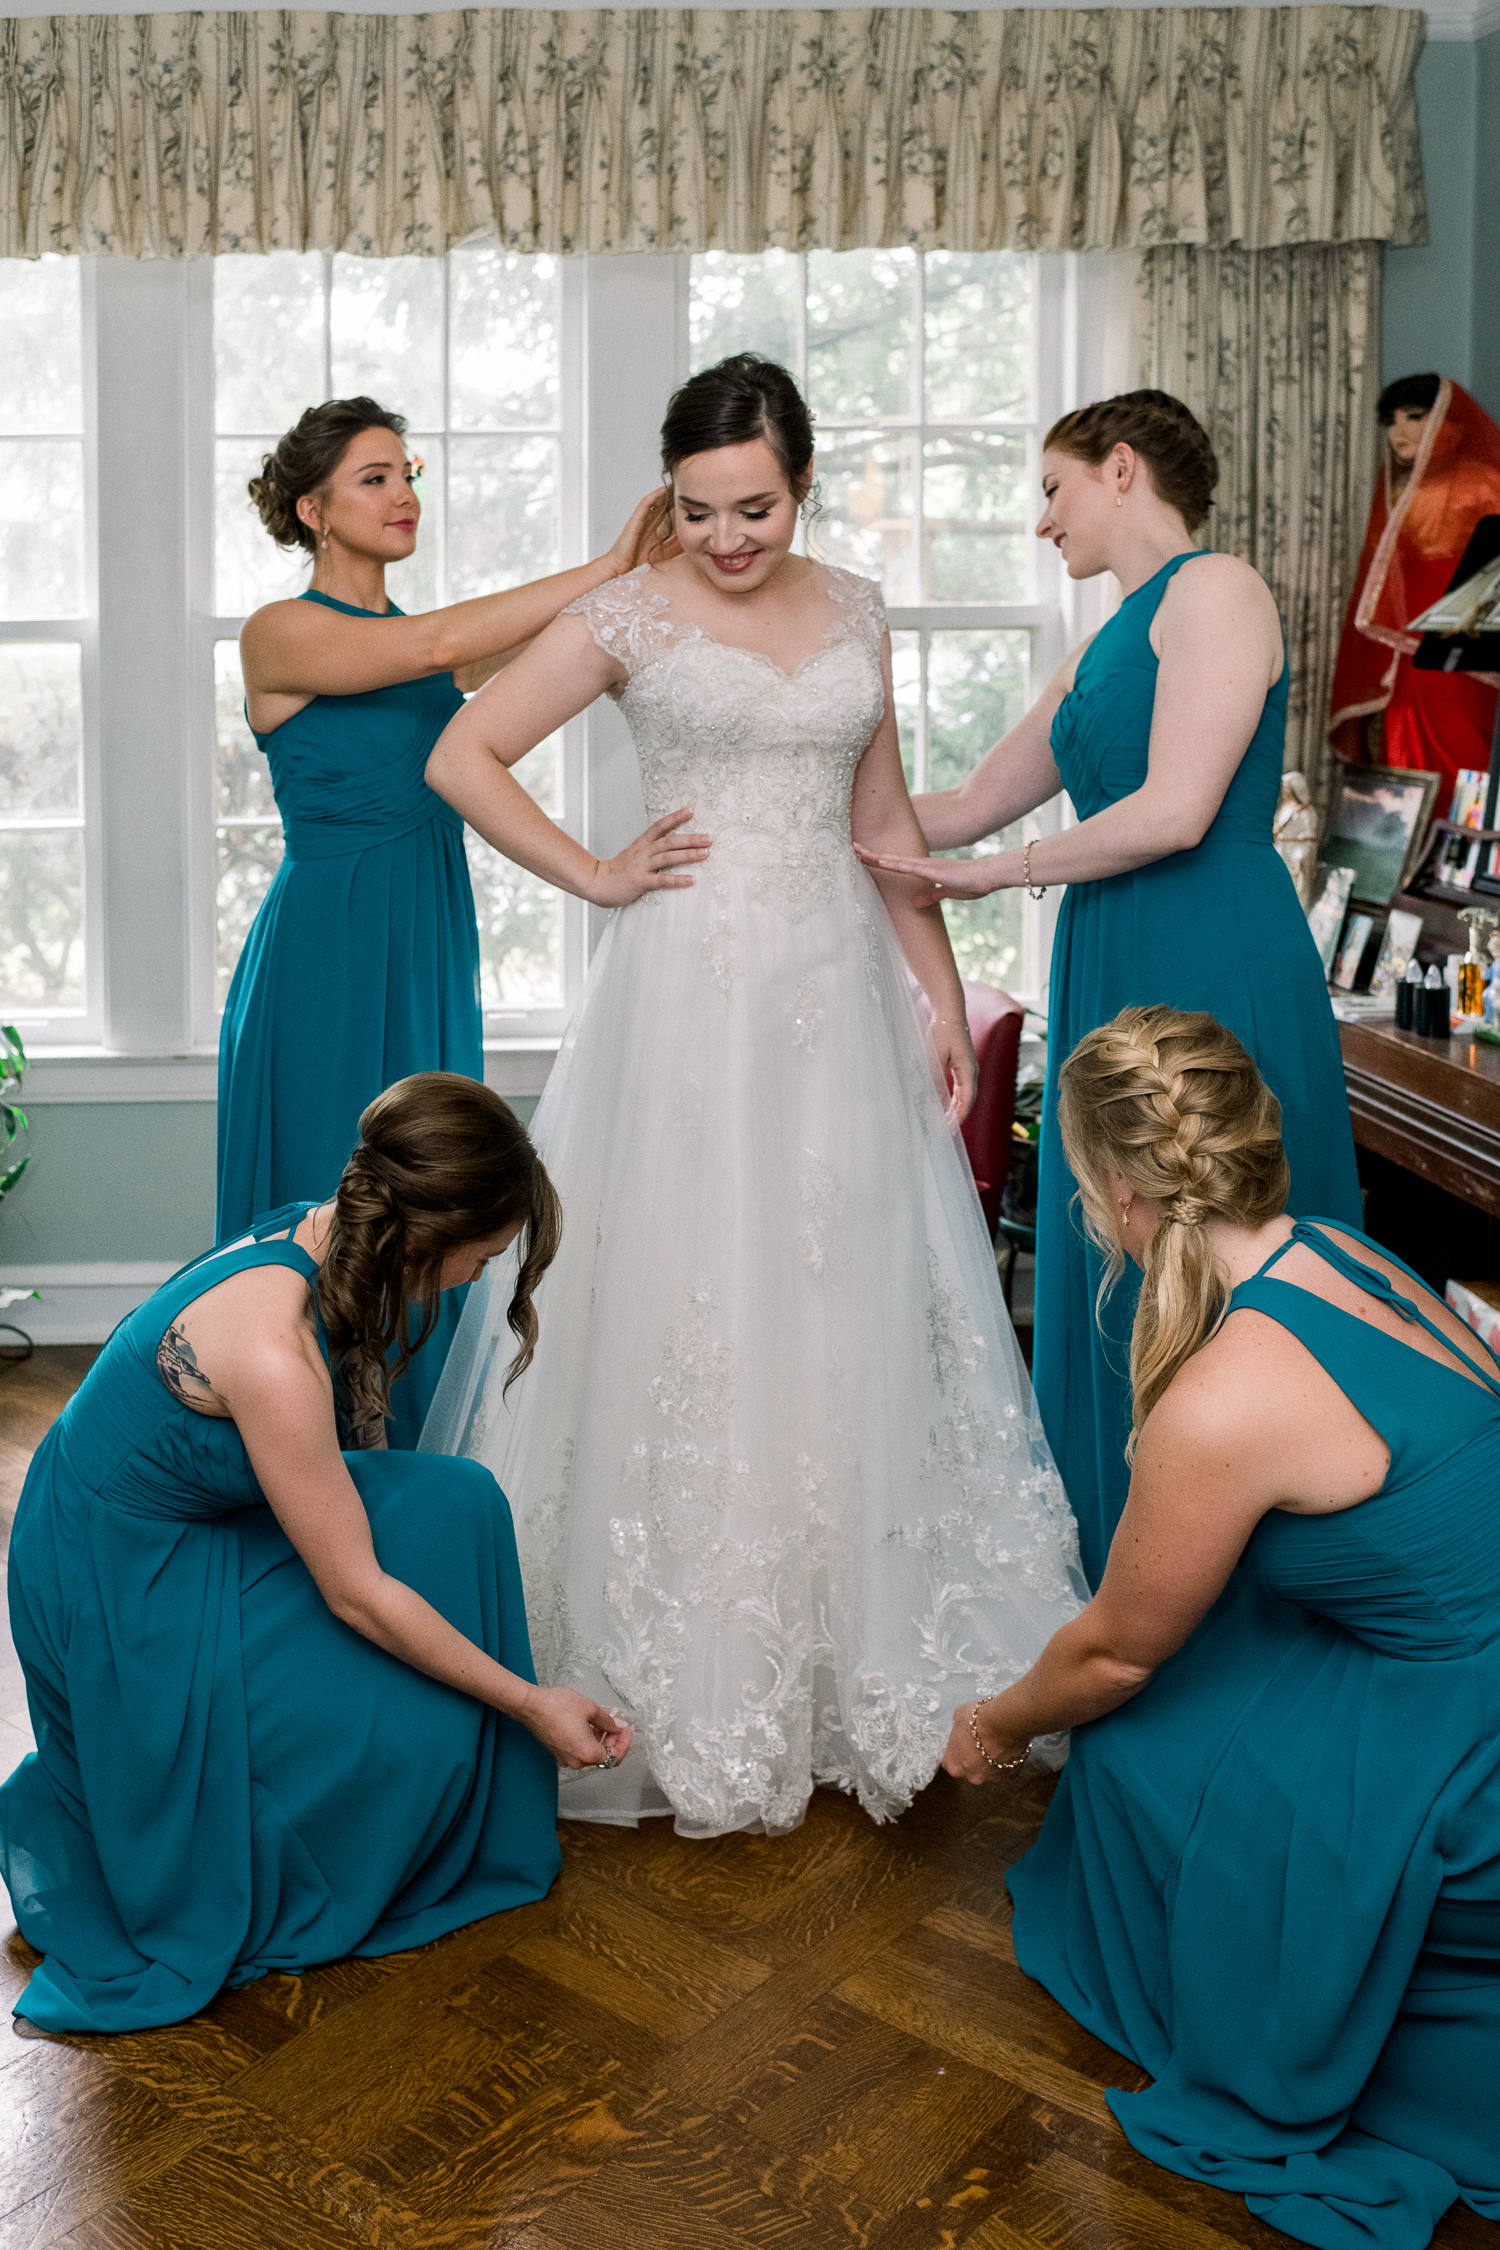 Bride's bridesmaids in teal dresses are helping her with her wedding dress